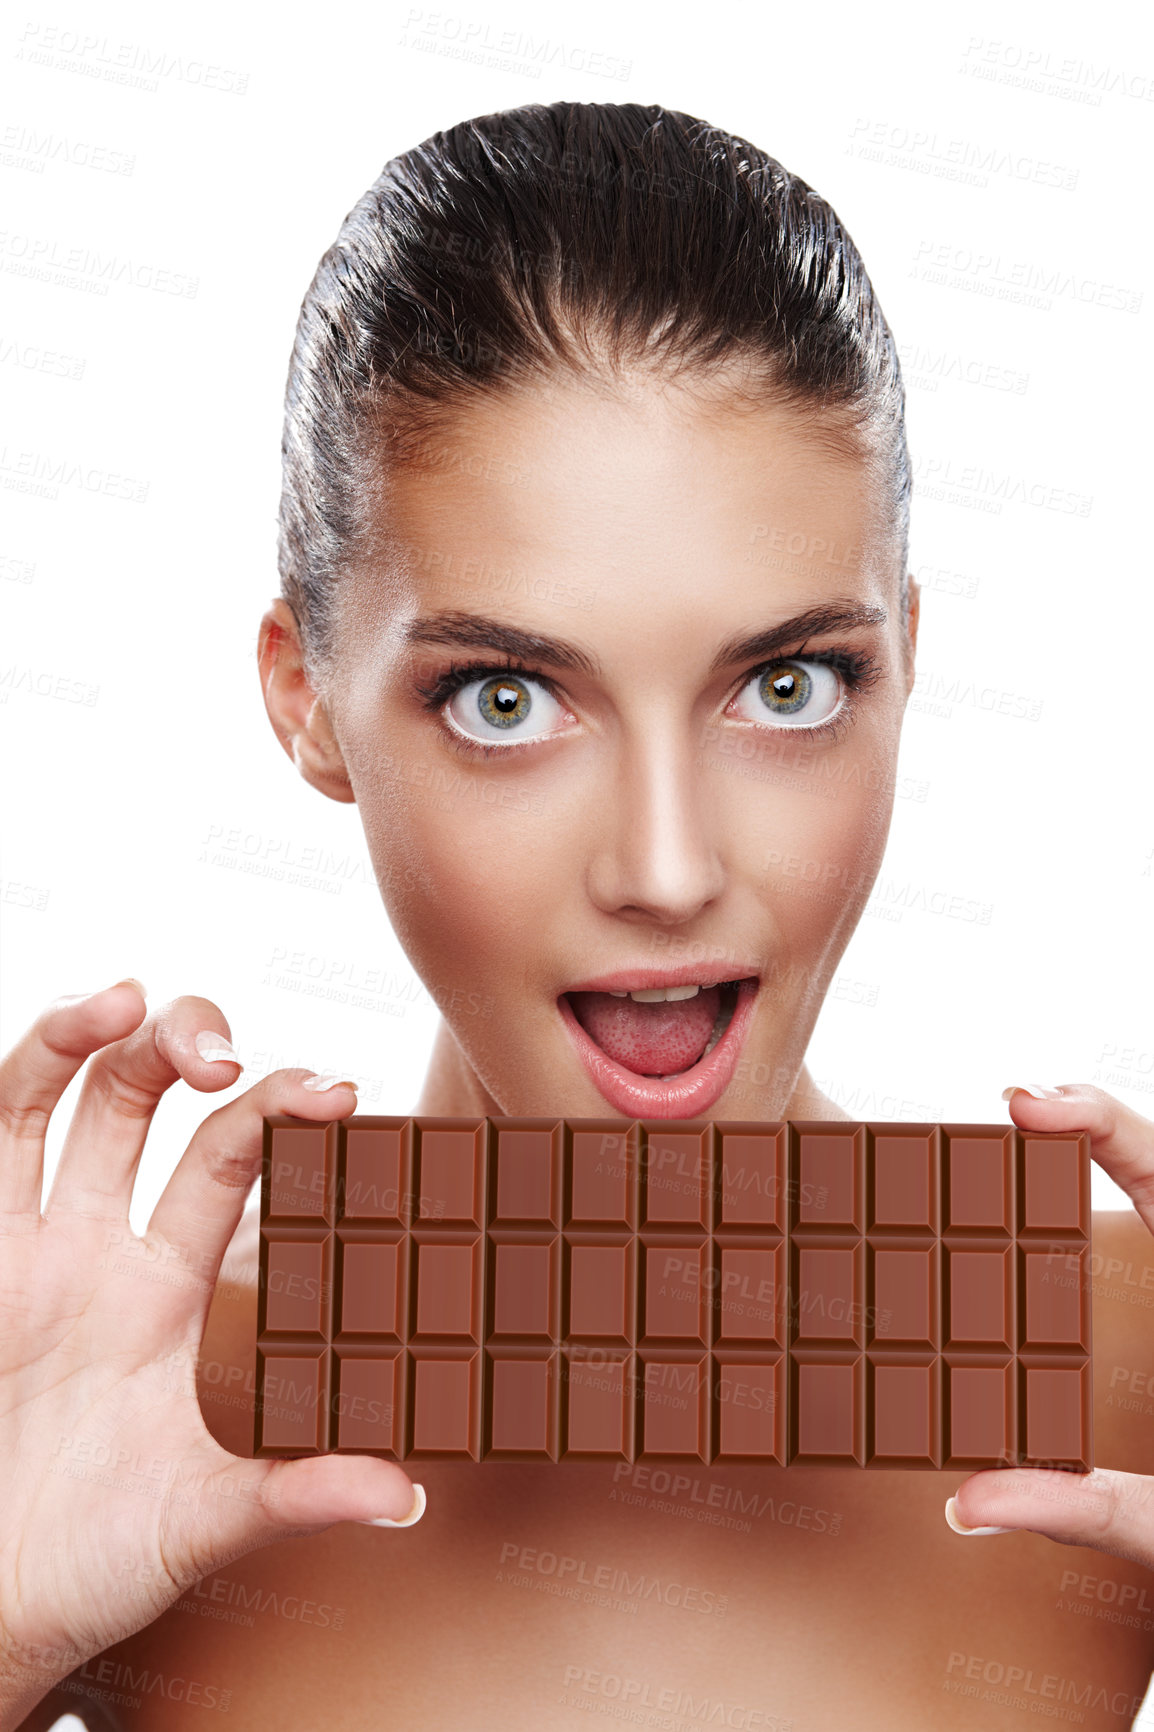 Buy stock photo Studio portrait of an attractive young woman about to bite into a slab of chocolate